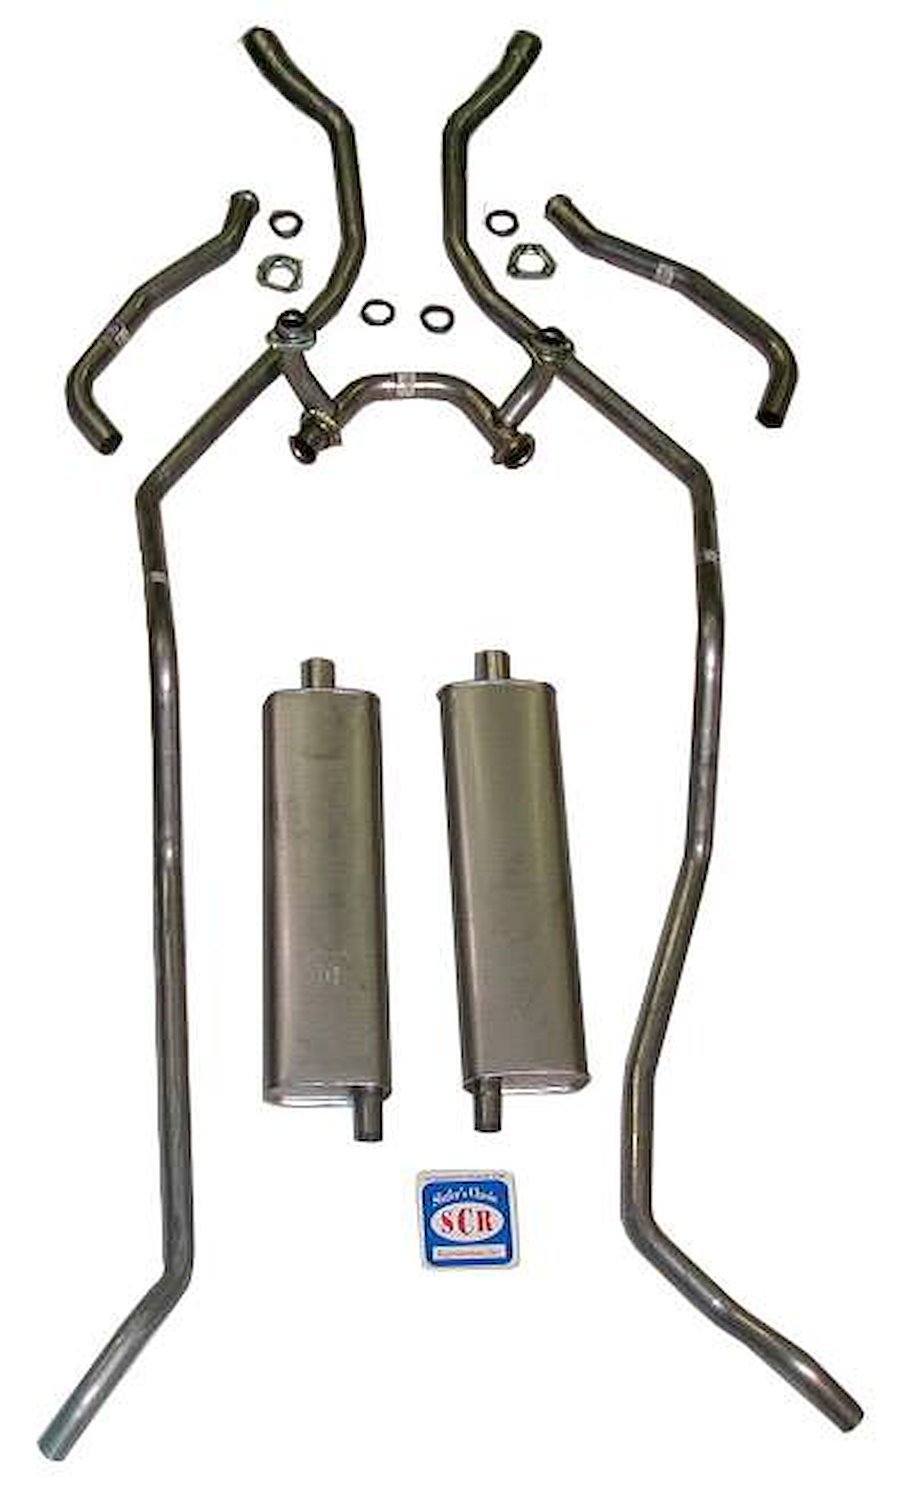 73010S 1958 Chevrolet Full-Size Exhaust System 8-cyl 348 Dual Exhaust, 304 Stainless Steel